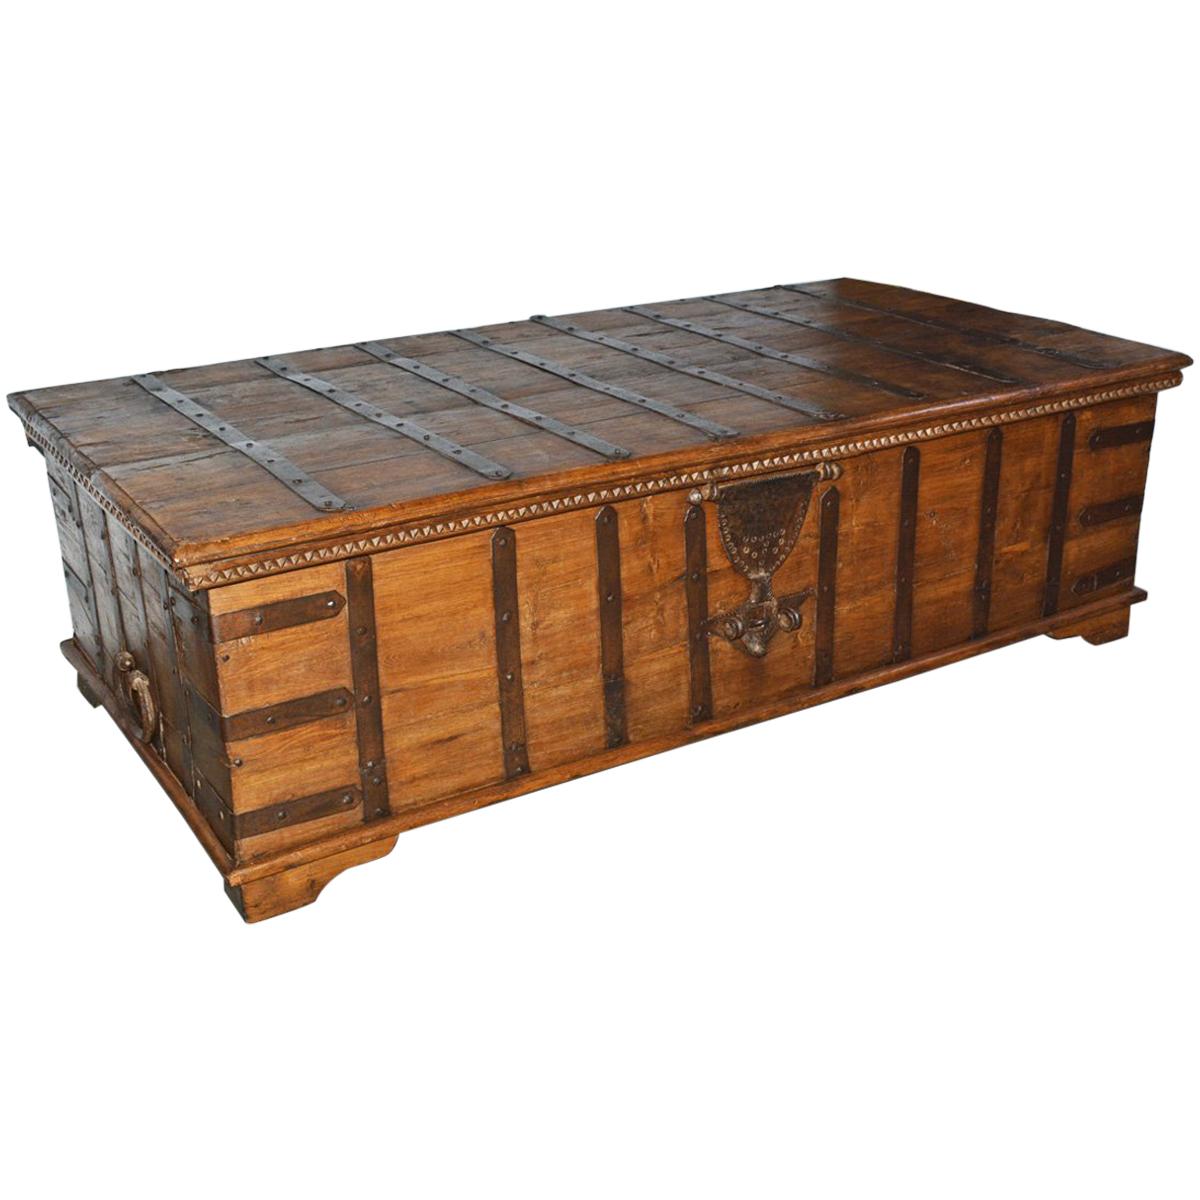 Large Scale Anglo-Indian Trunk Coffee Table